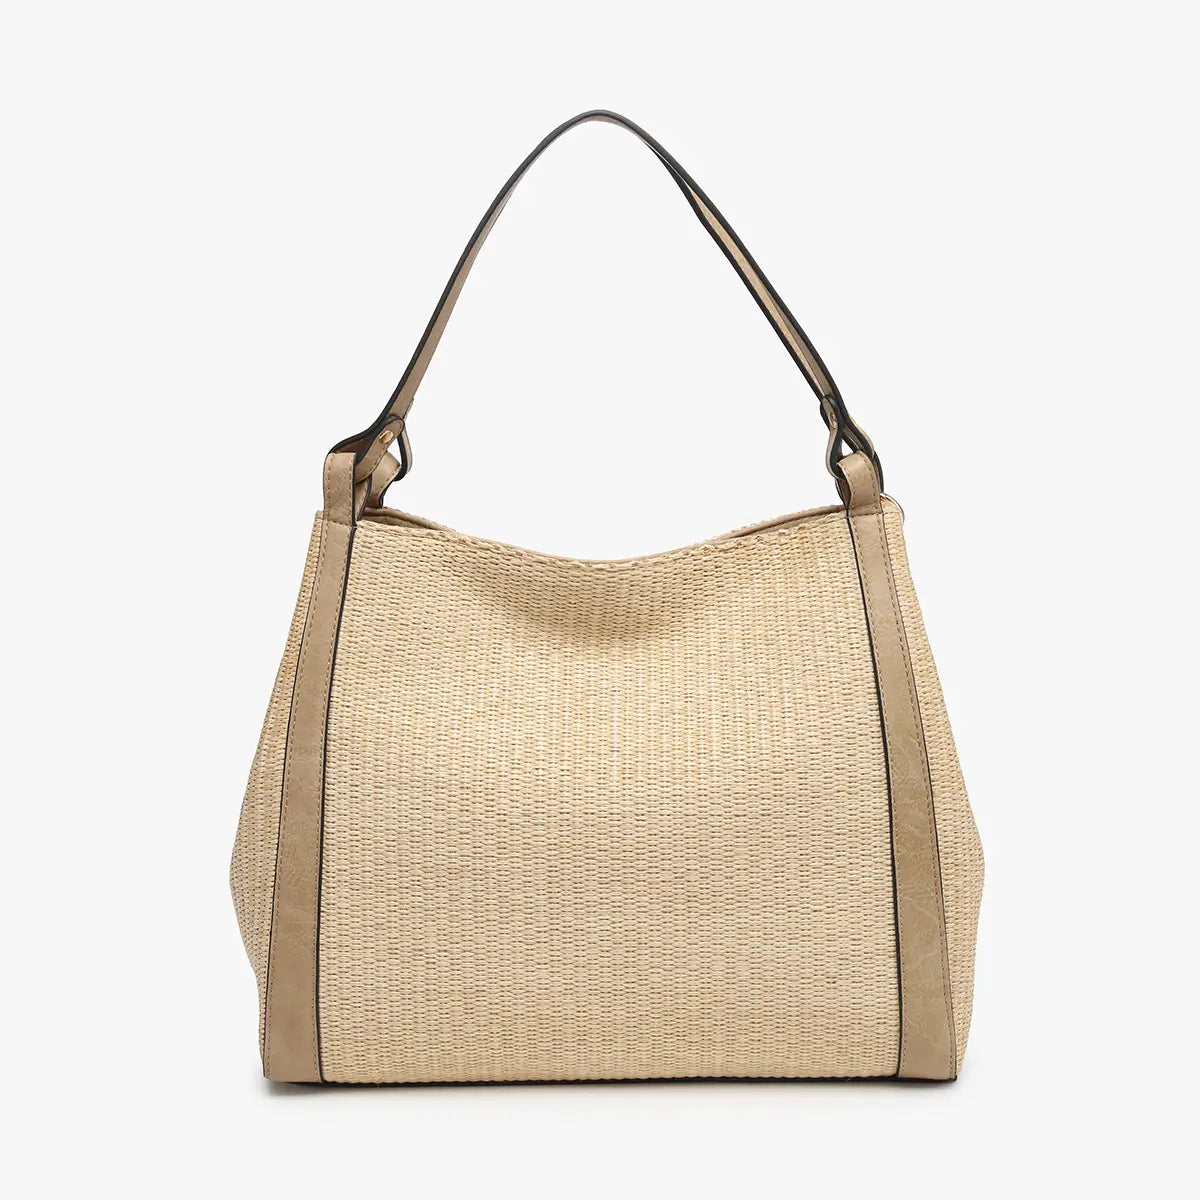 Woven Tote w/ Large Tassel